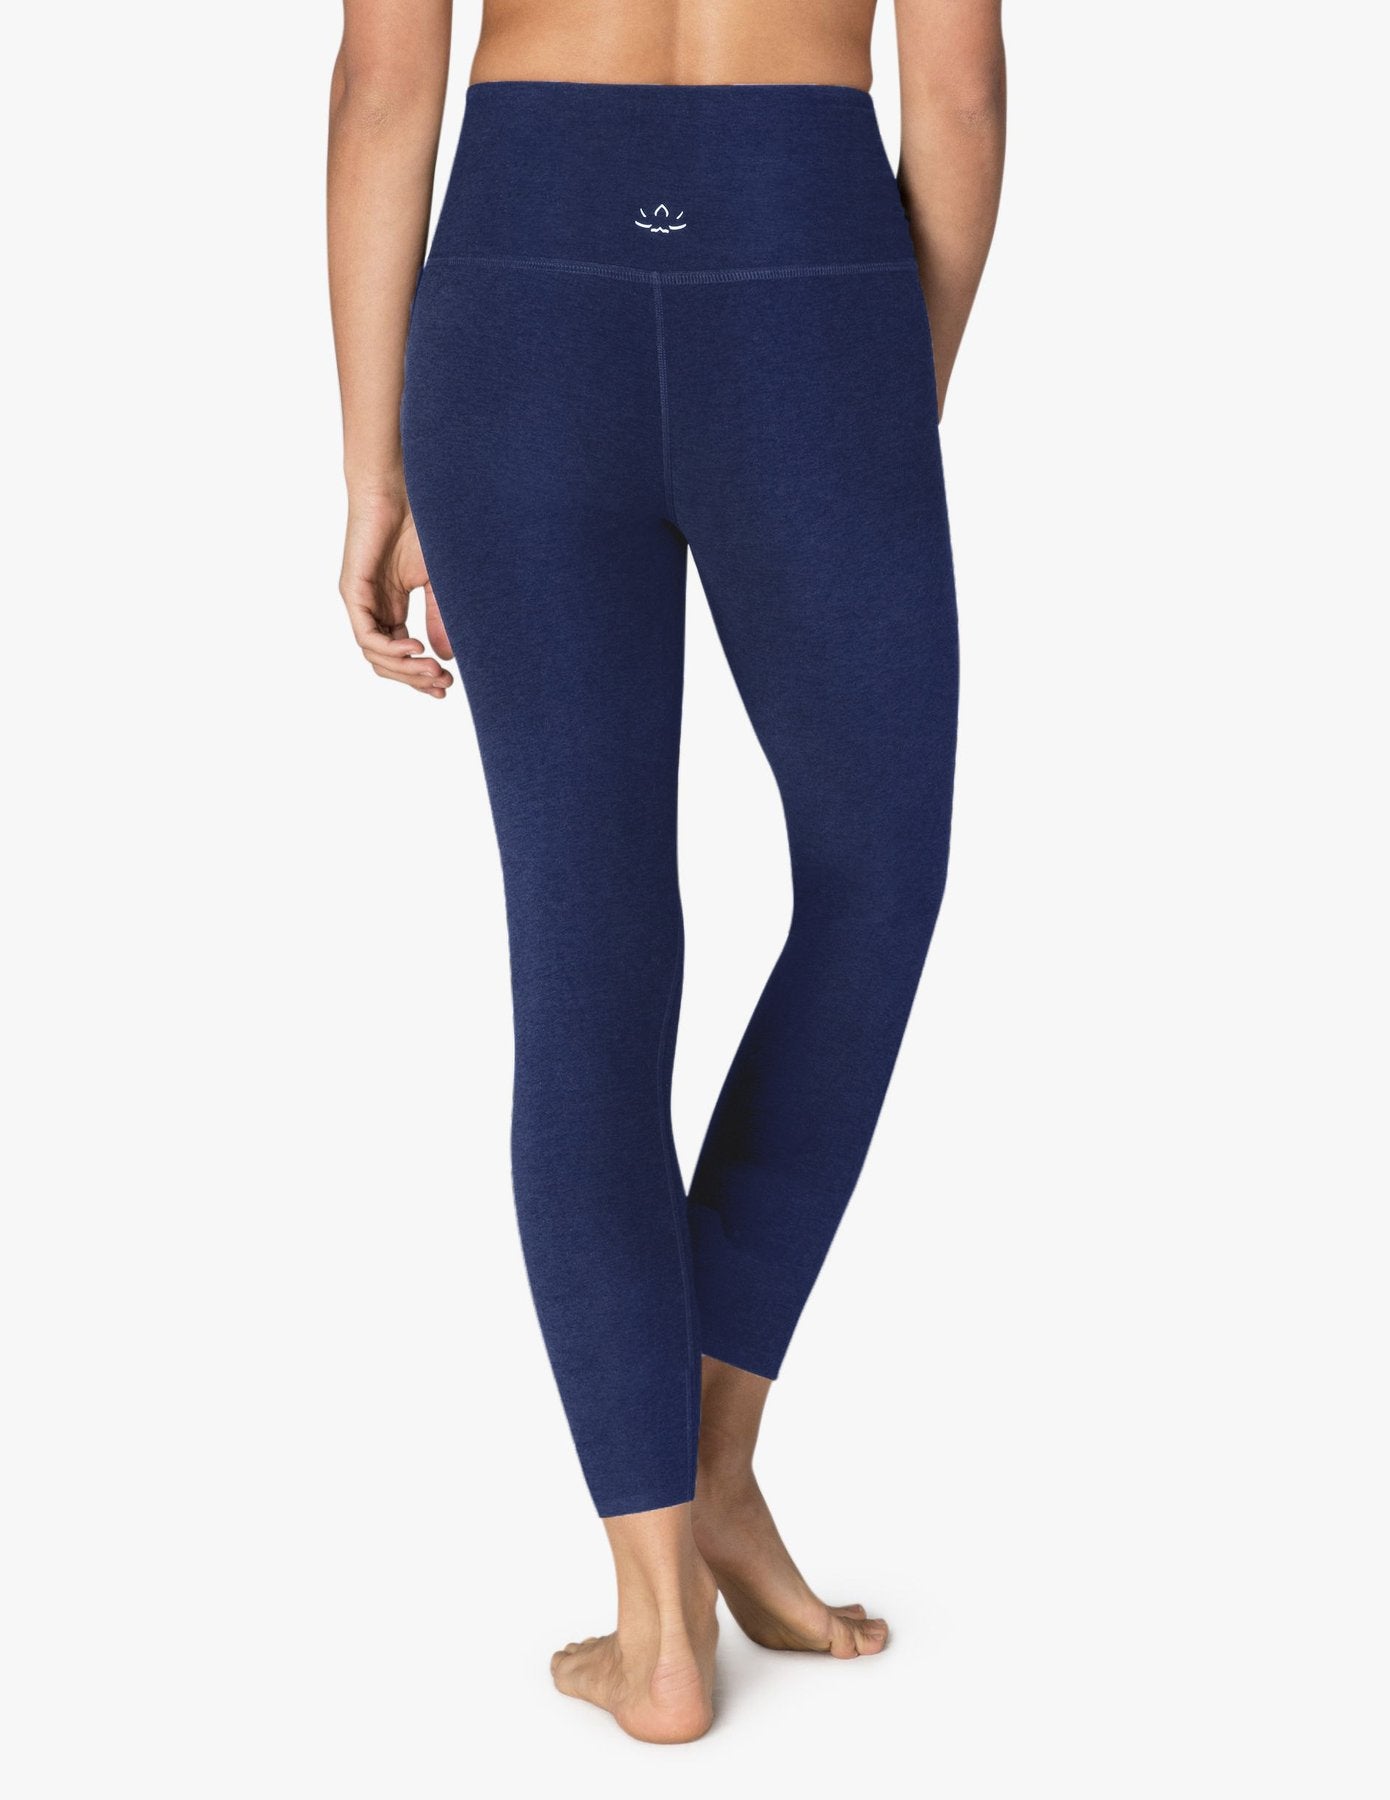 BEYOND YOGA SPACEDYE CAUGHT IN THE MIDI HIGH WAISTED LEGGING NOCTURNAL NAVY